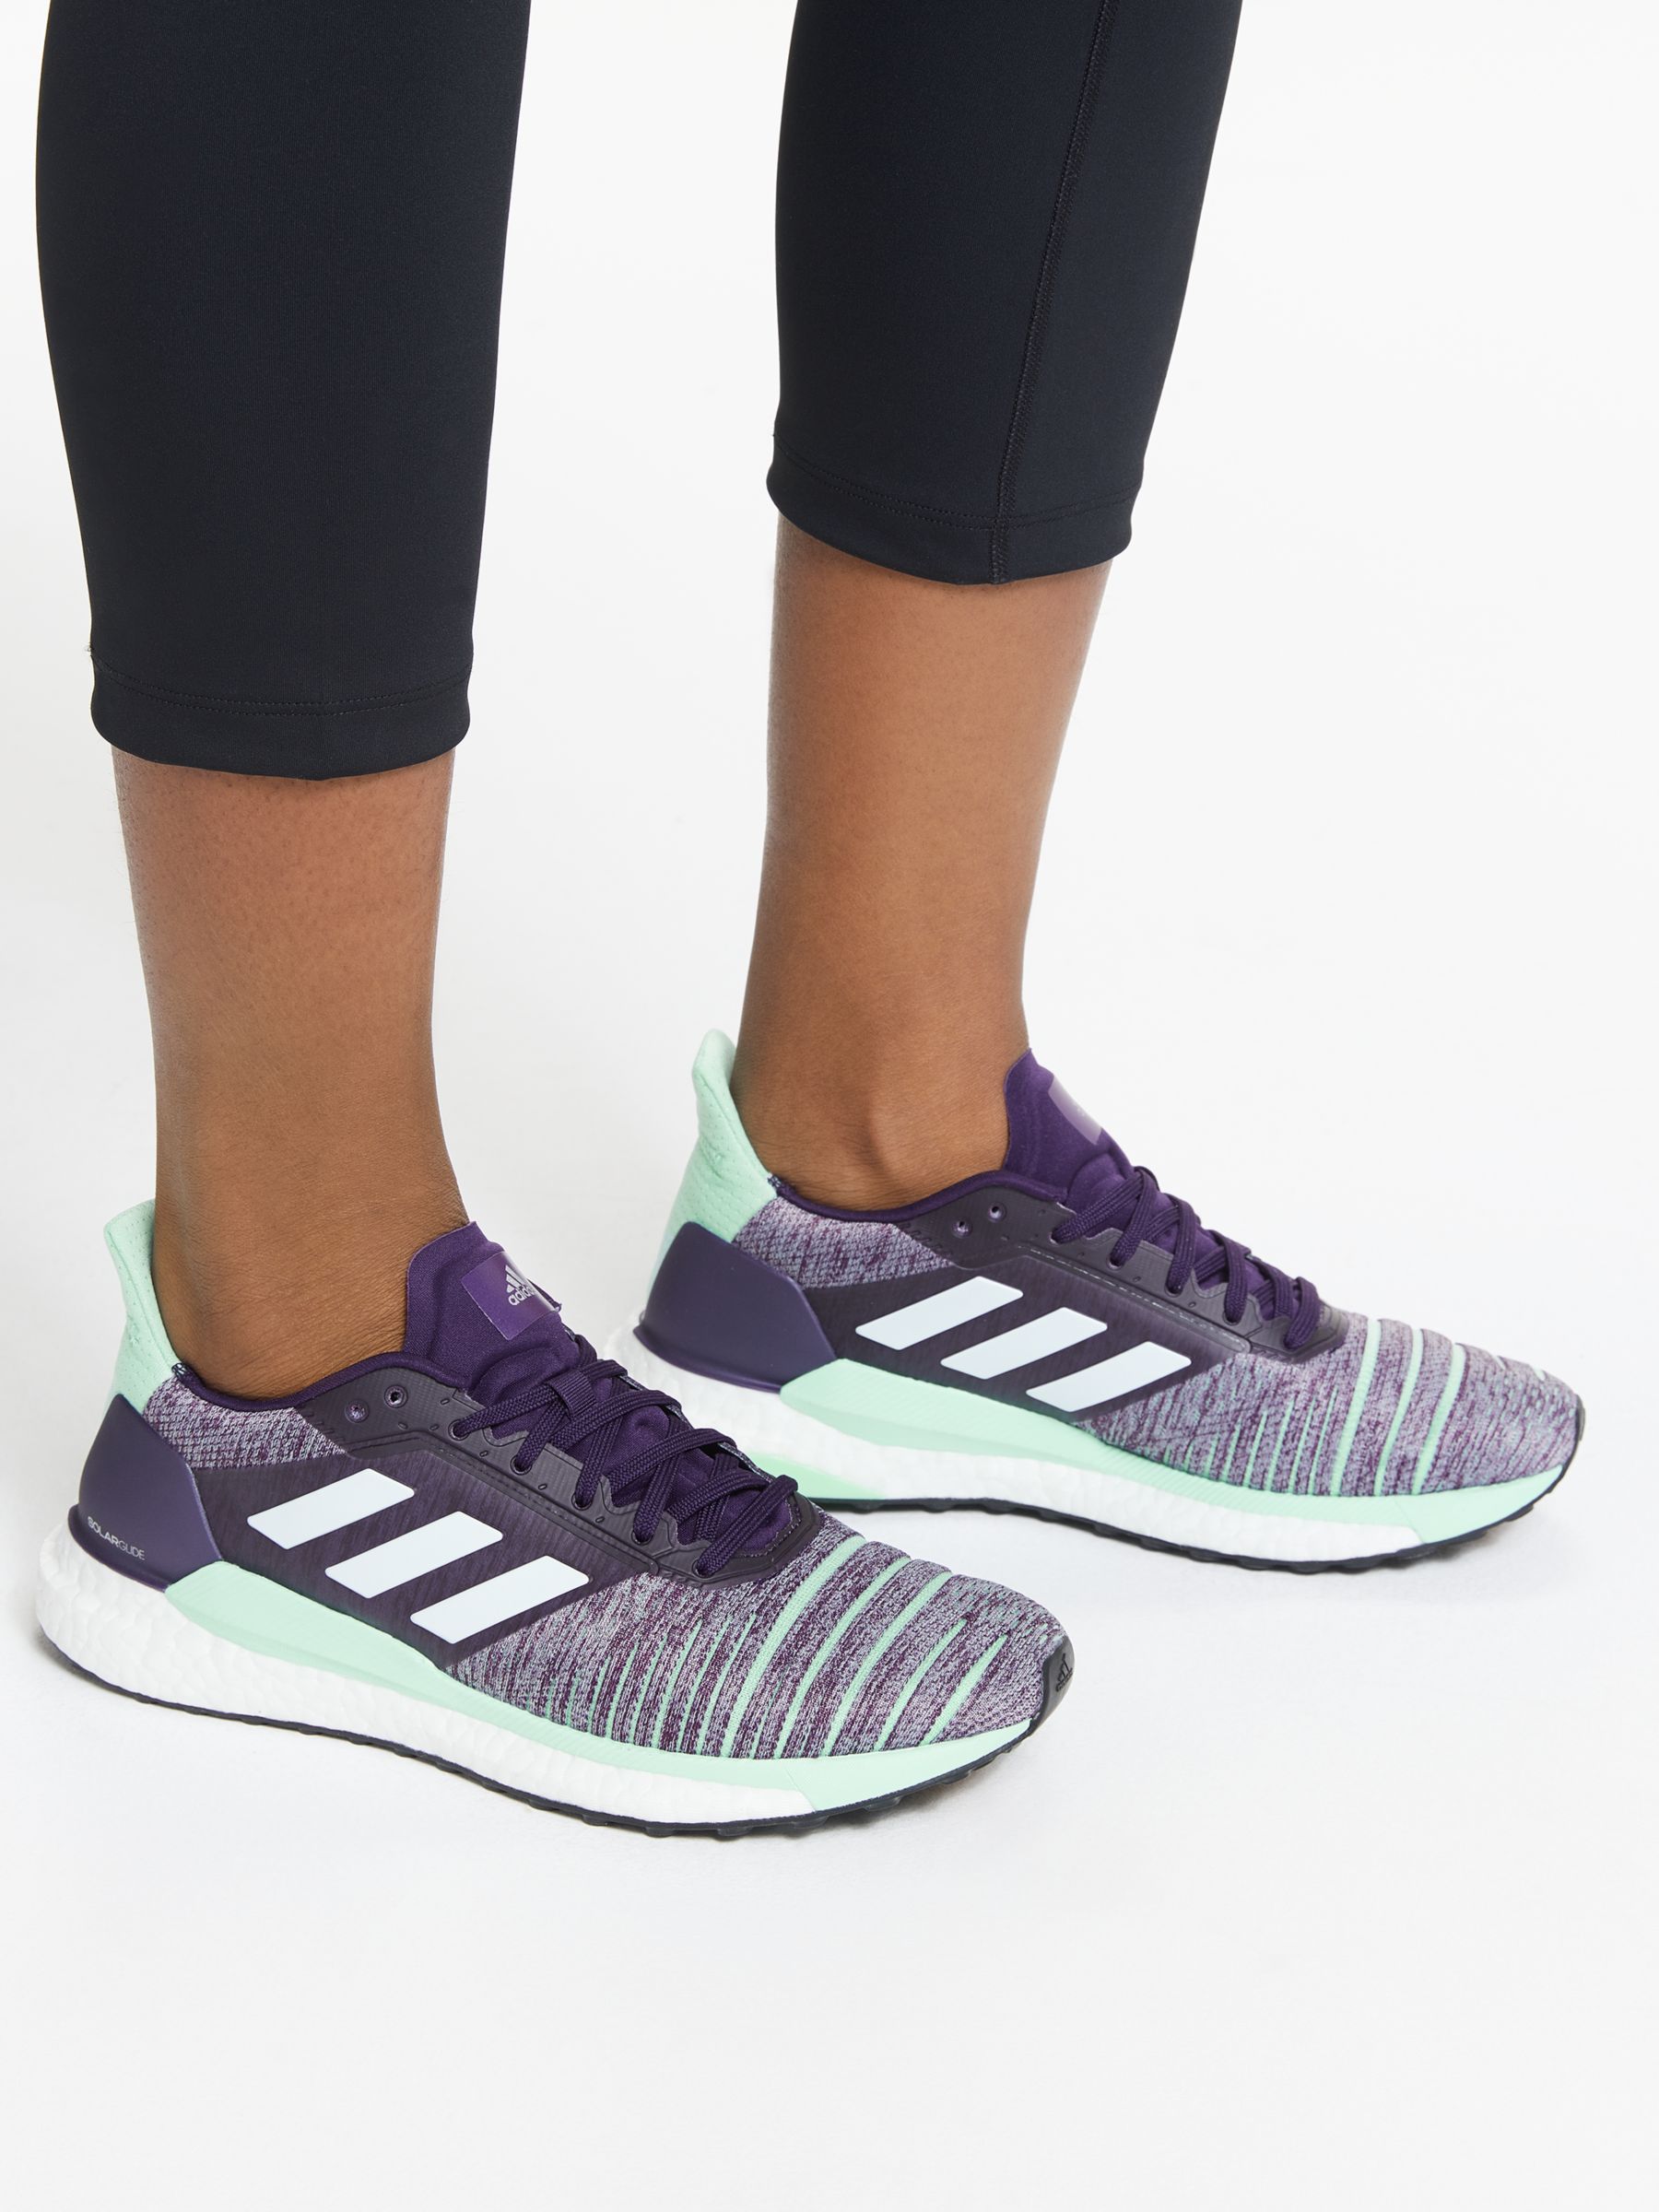 adidas solarglide ladies running shoes